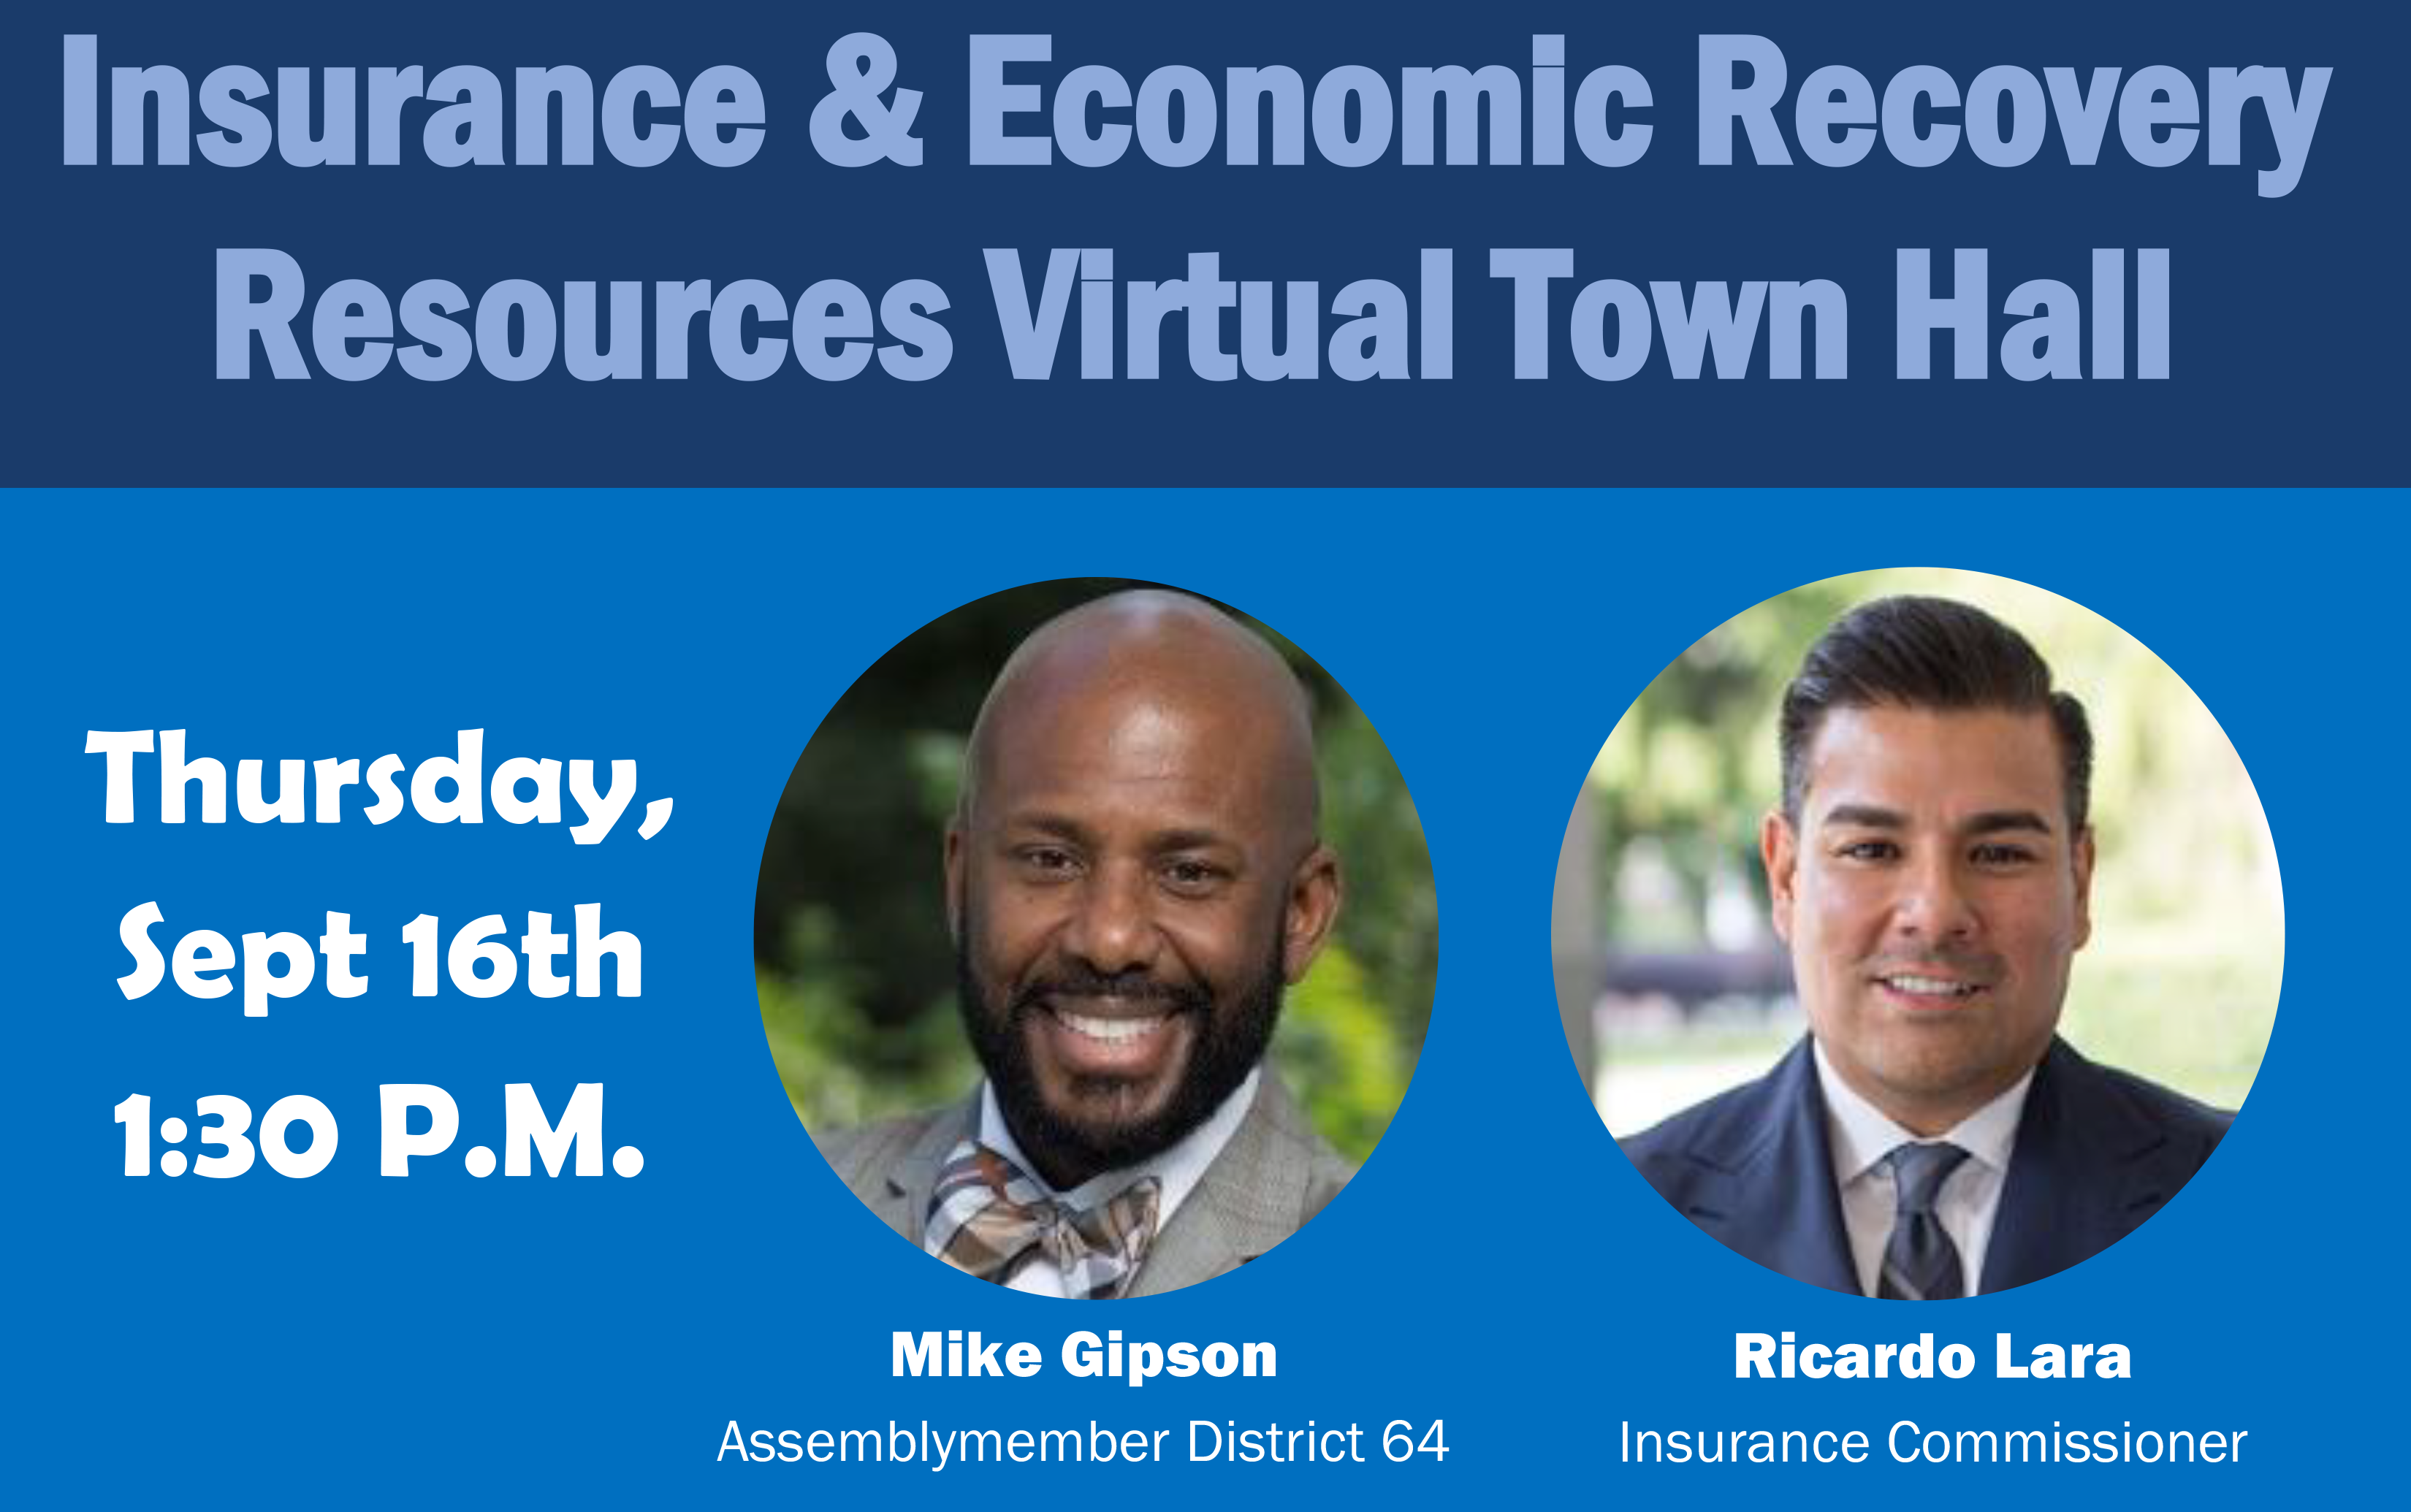 Insurance &amp; Economic Recovery Resources Virtual Town Hall, ASM Mike Gipson, September 16th  Thursday, Sept 16th, 1:30PM Mike Gipson, Assemblymember District 64 Ricardo Lara, Insurance Commissioner